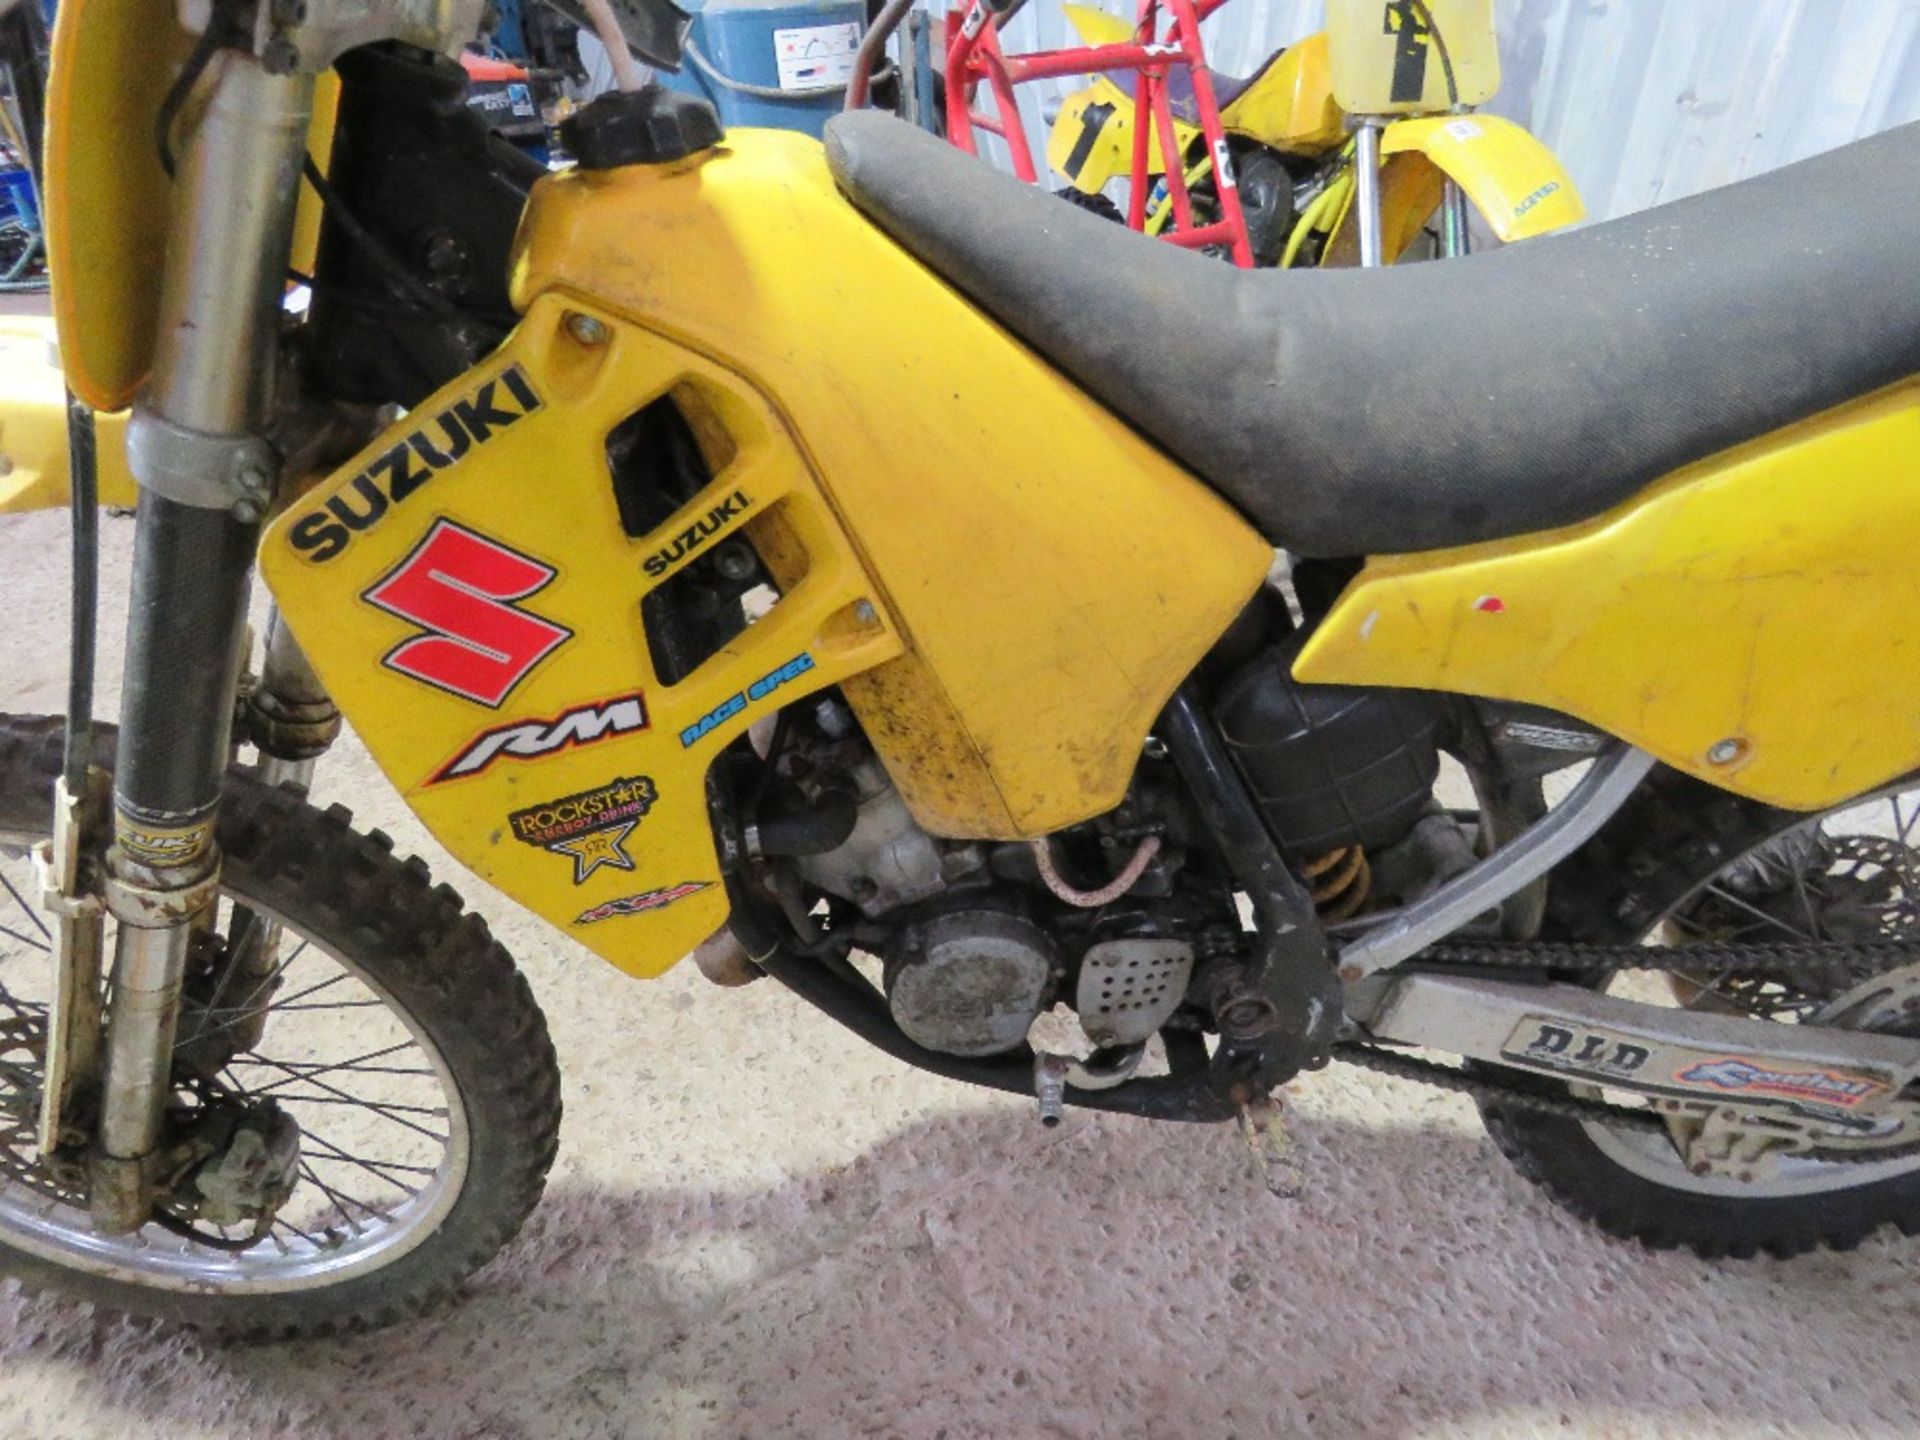 SUZUKI MOTOCROSS TRIALS MOTORBIKE. BEEN IN STORAGE AND UNUSED FOR OVER 5 YEARS. THIS LOT I - Image 6 of 9